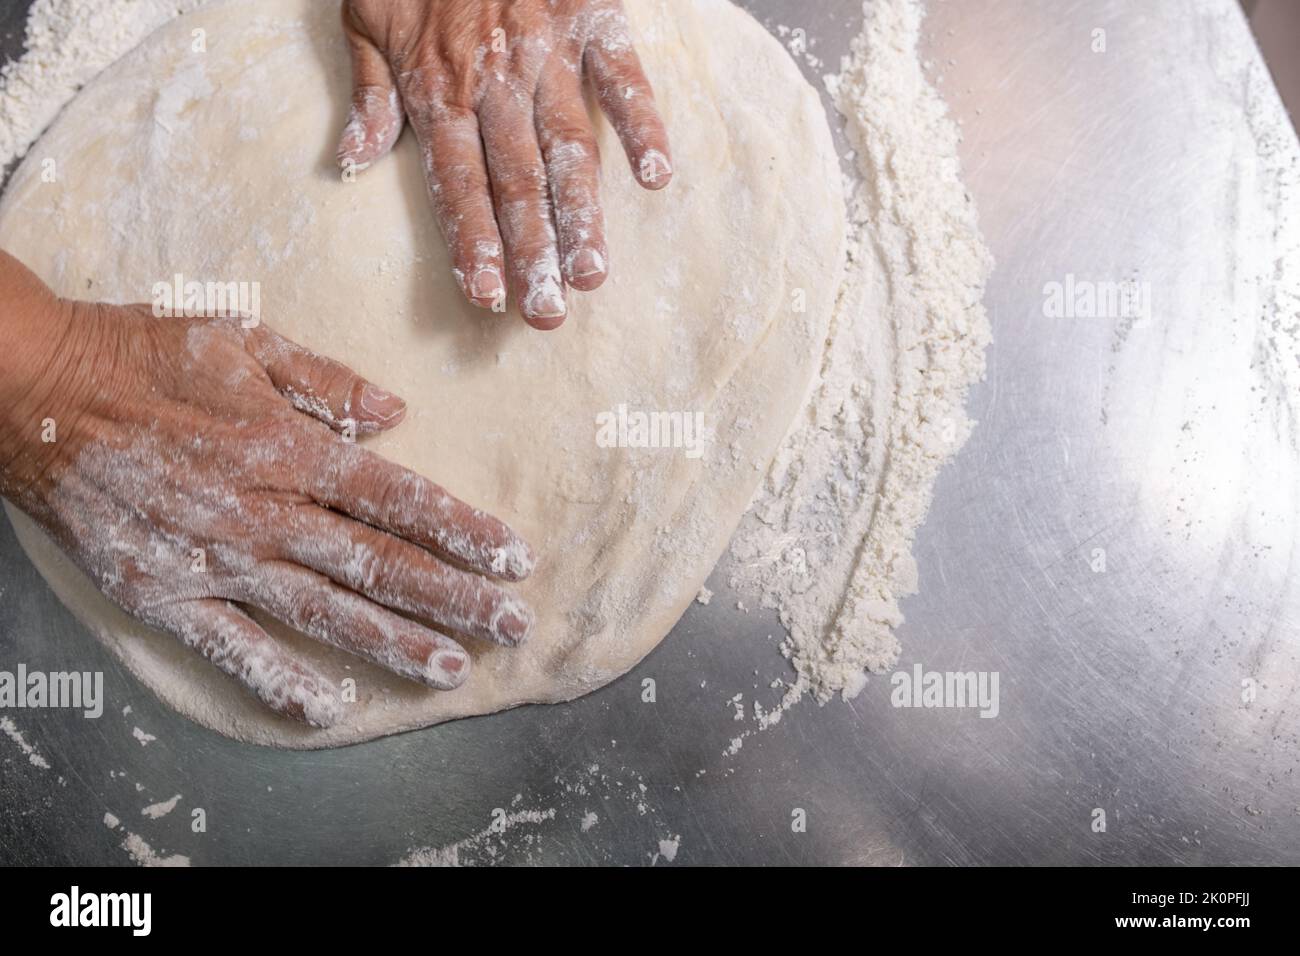 Woman making pizza dough on stainless steel counter. Motion blur Stock Photo